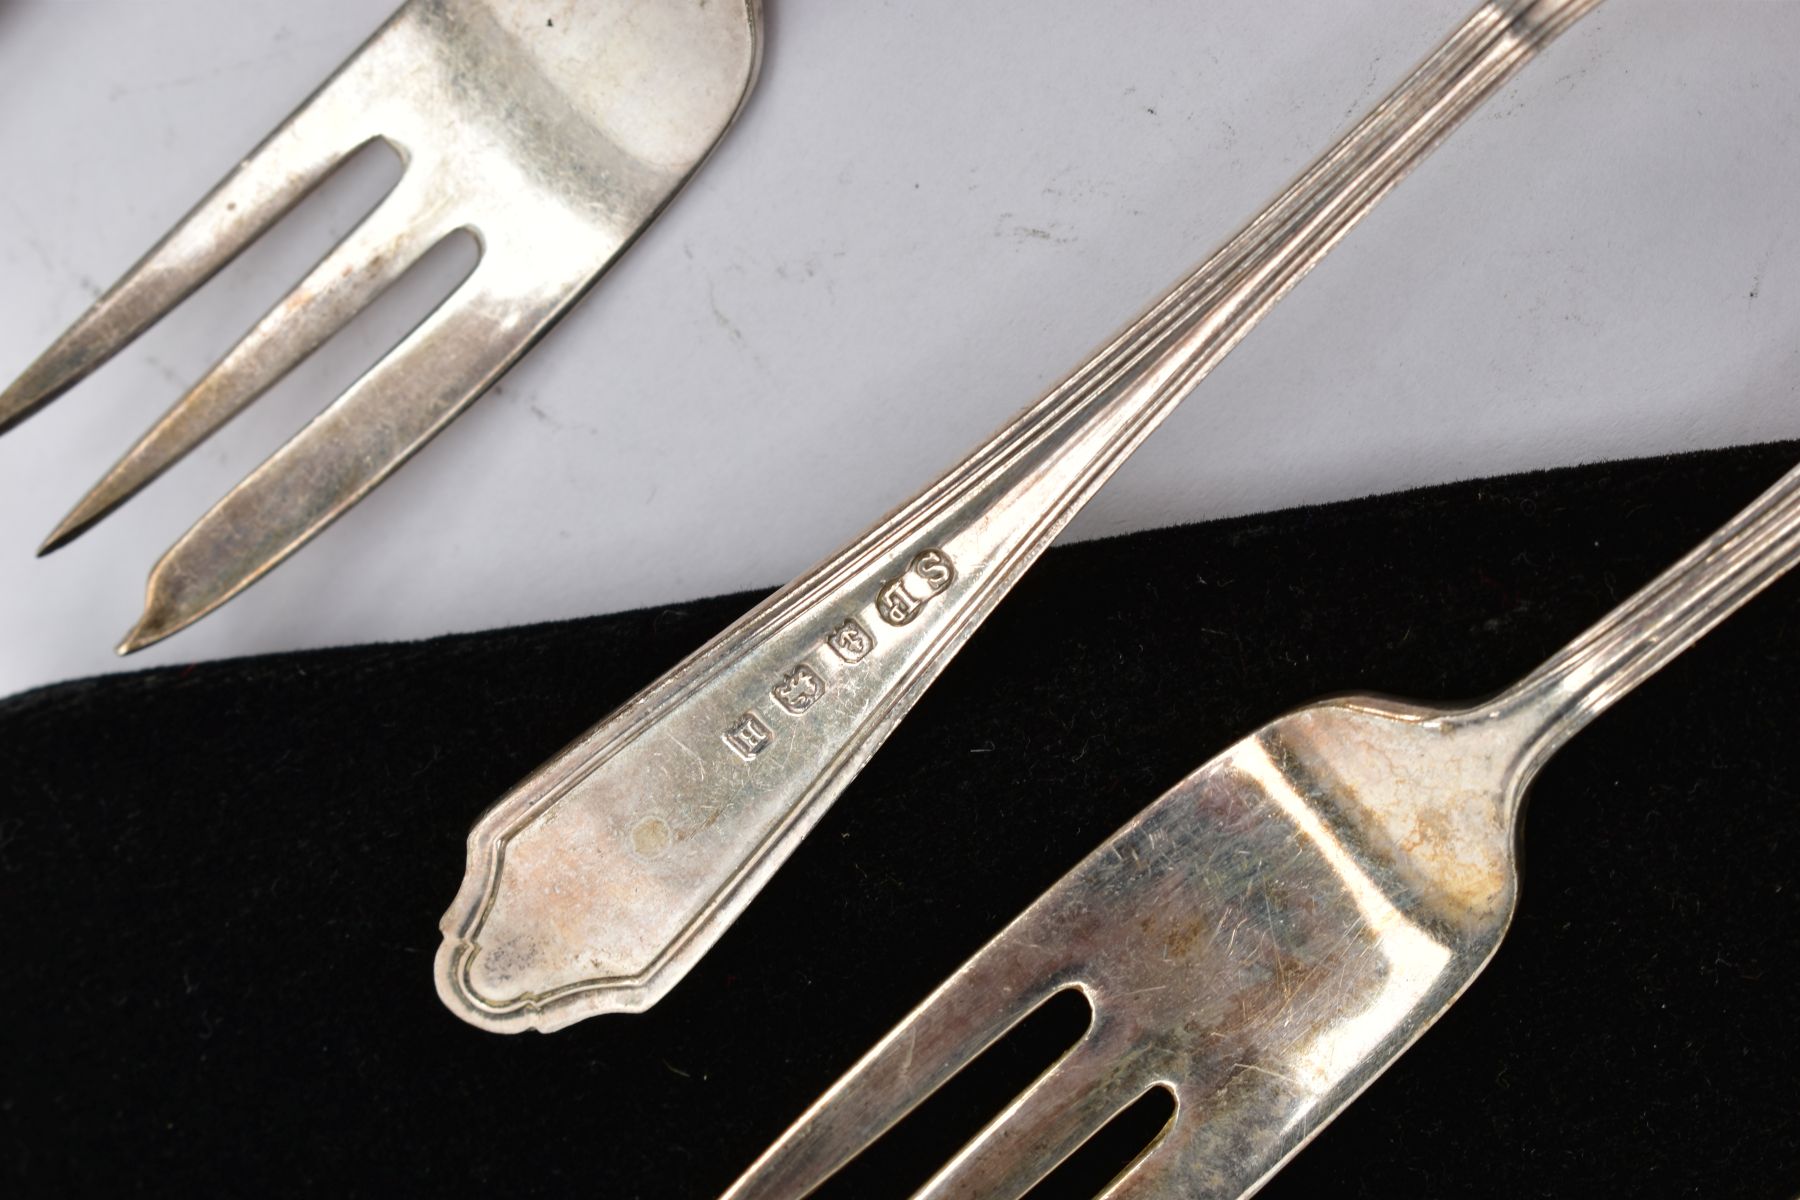 SIX SILVER CAKE FORKS, flower decoration to the handle, each hallmarked 'William Suckling Ltd' - Image 2 of 2